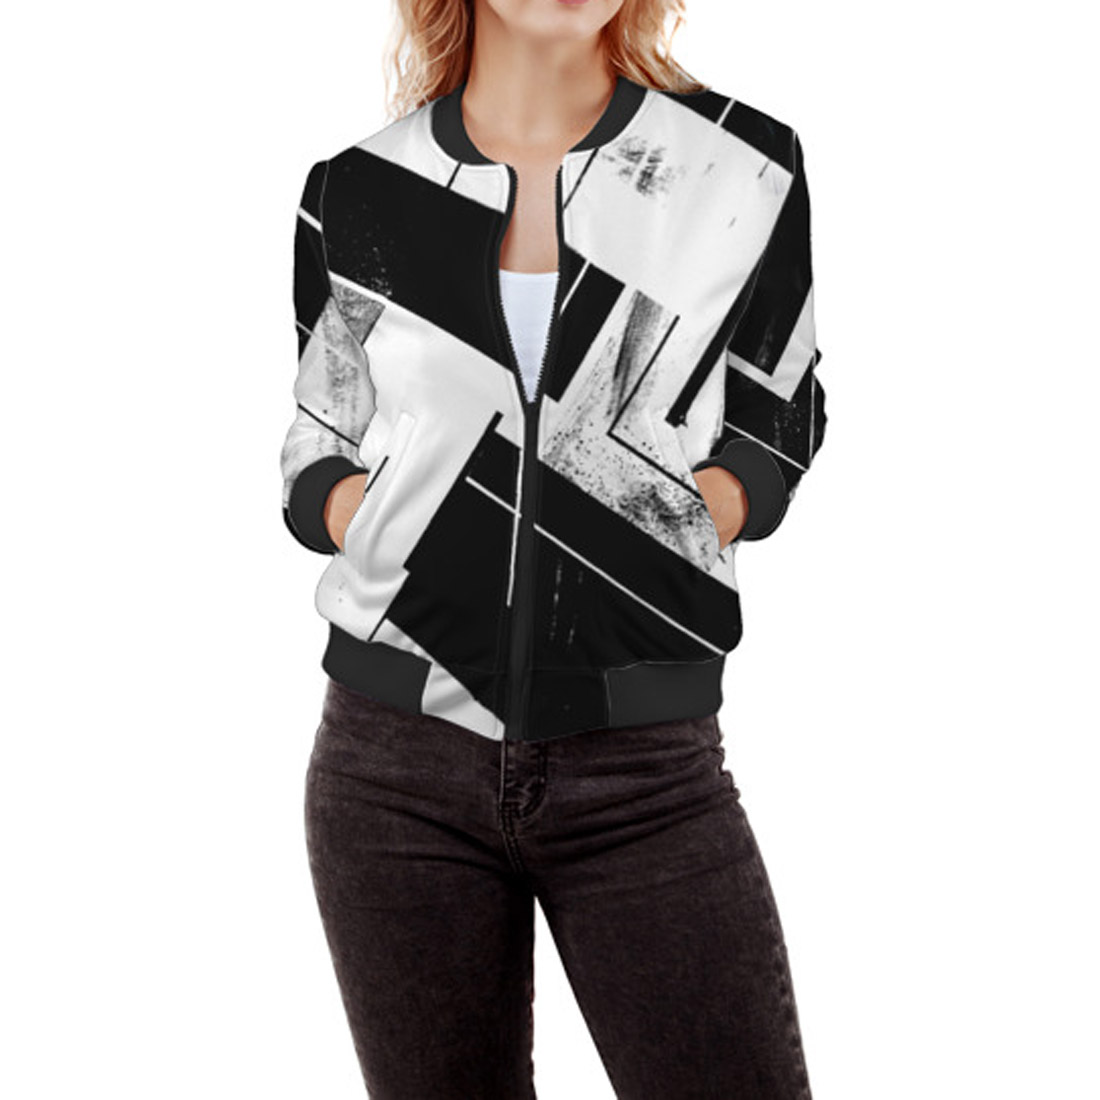 black and white striped jacket women's